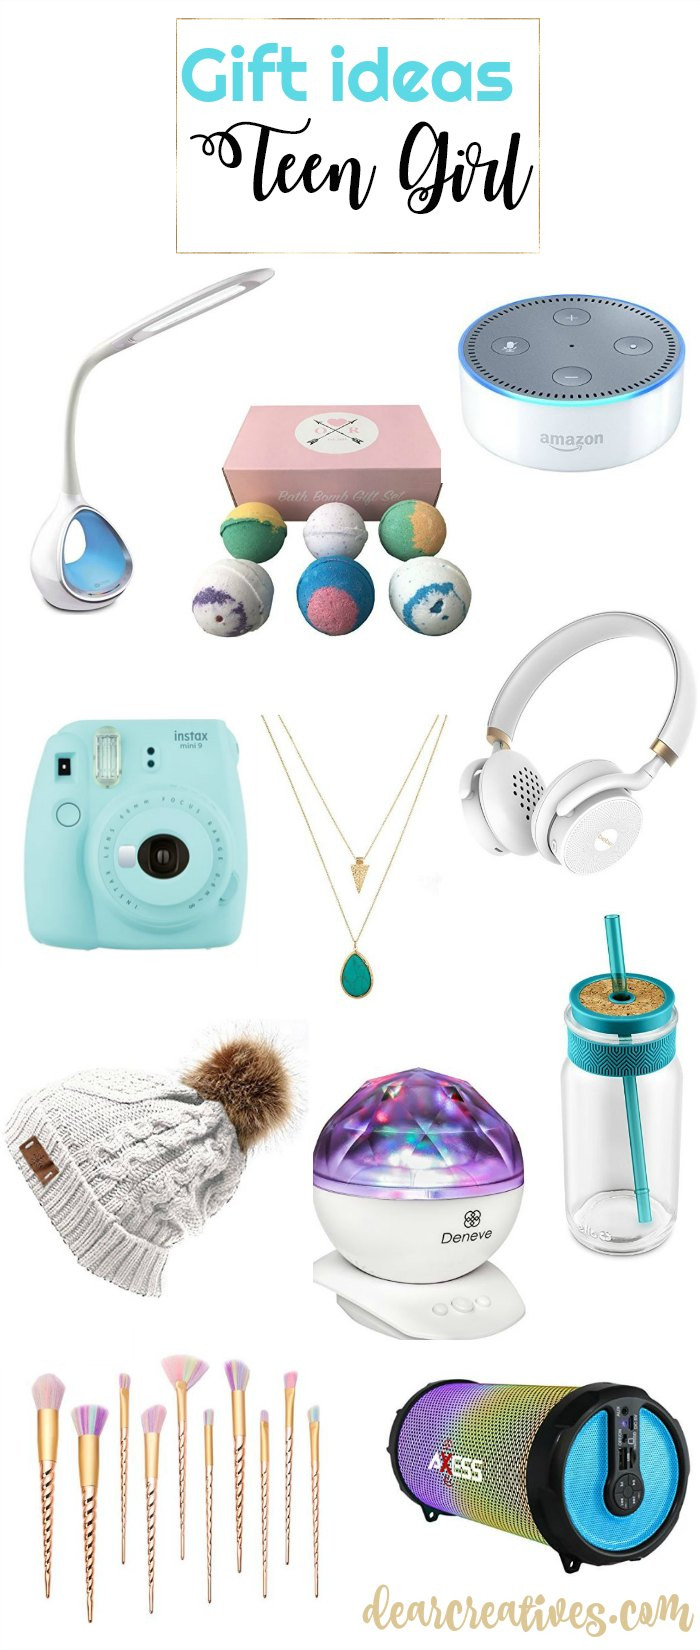 Great Gift Ideas For Girls
 Gift Ideas for Teen Girls This Gift Guide Packed Full of